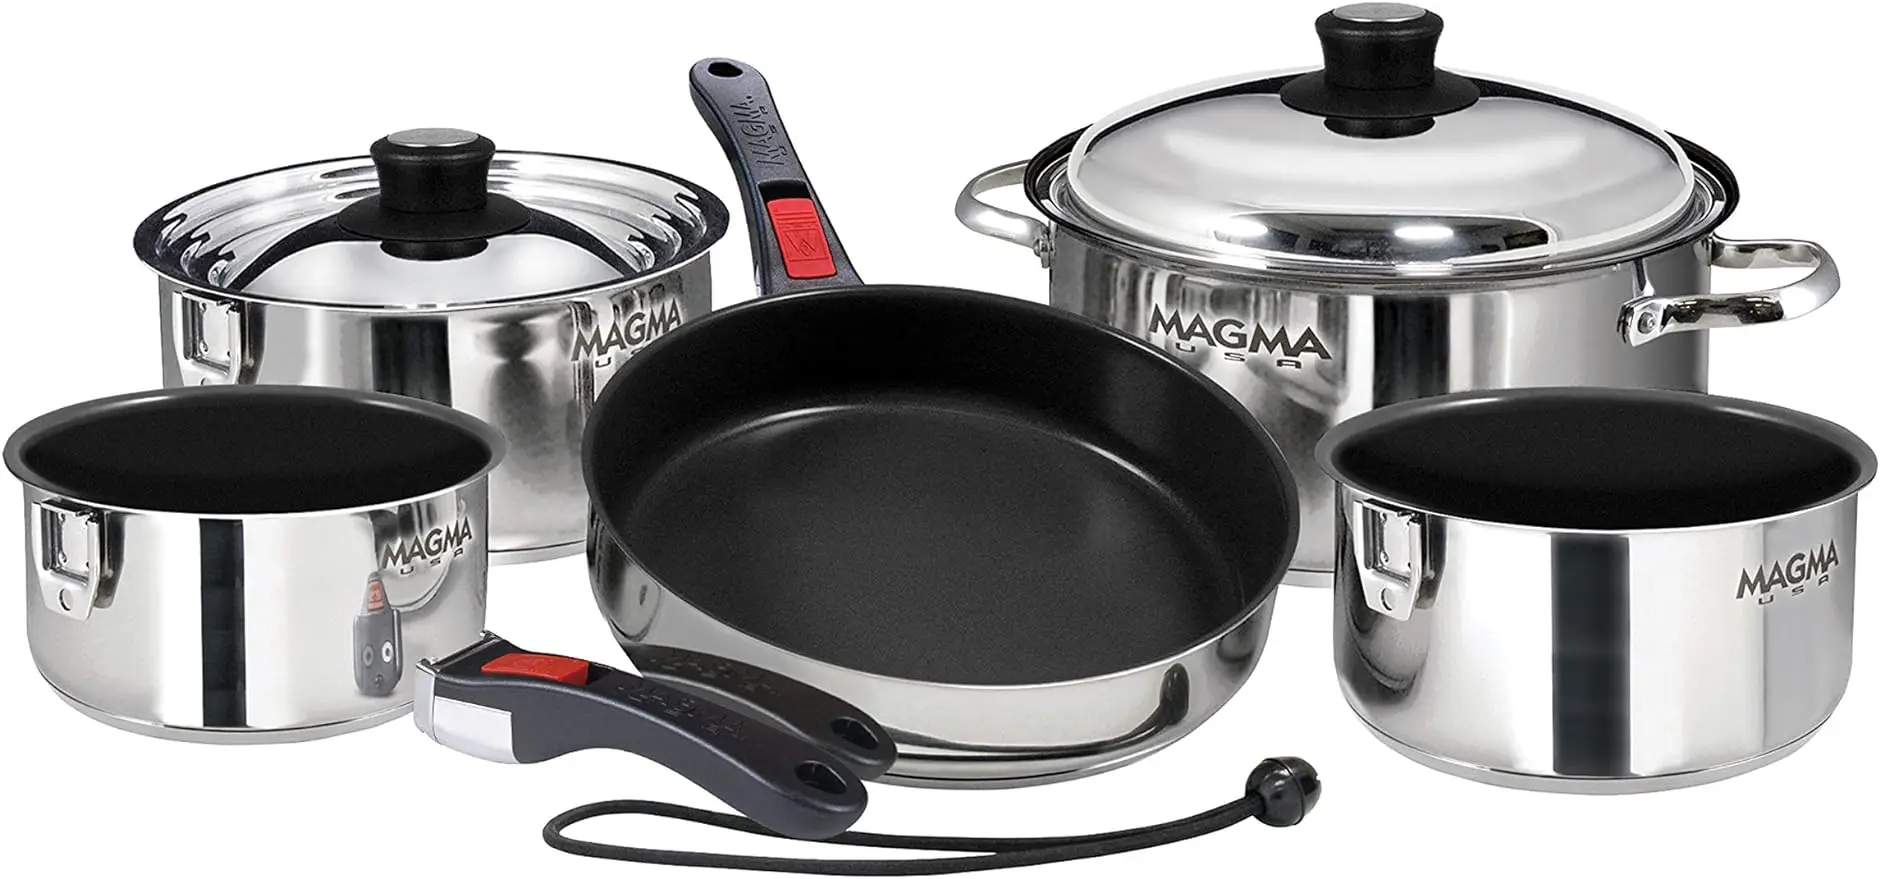 

Magma Products, A10-366-2-IND Gourmet Nesting Stainless Steel Induction Cookware Set with Non-Stick Ceramica (10 Piece)